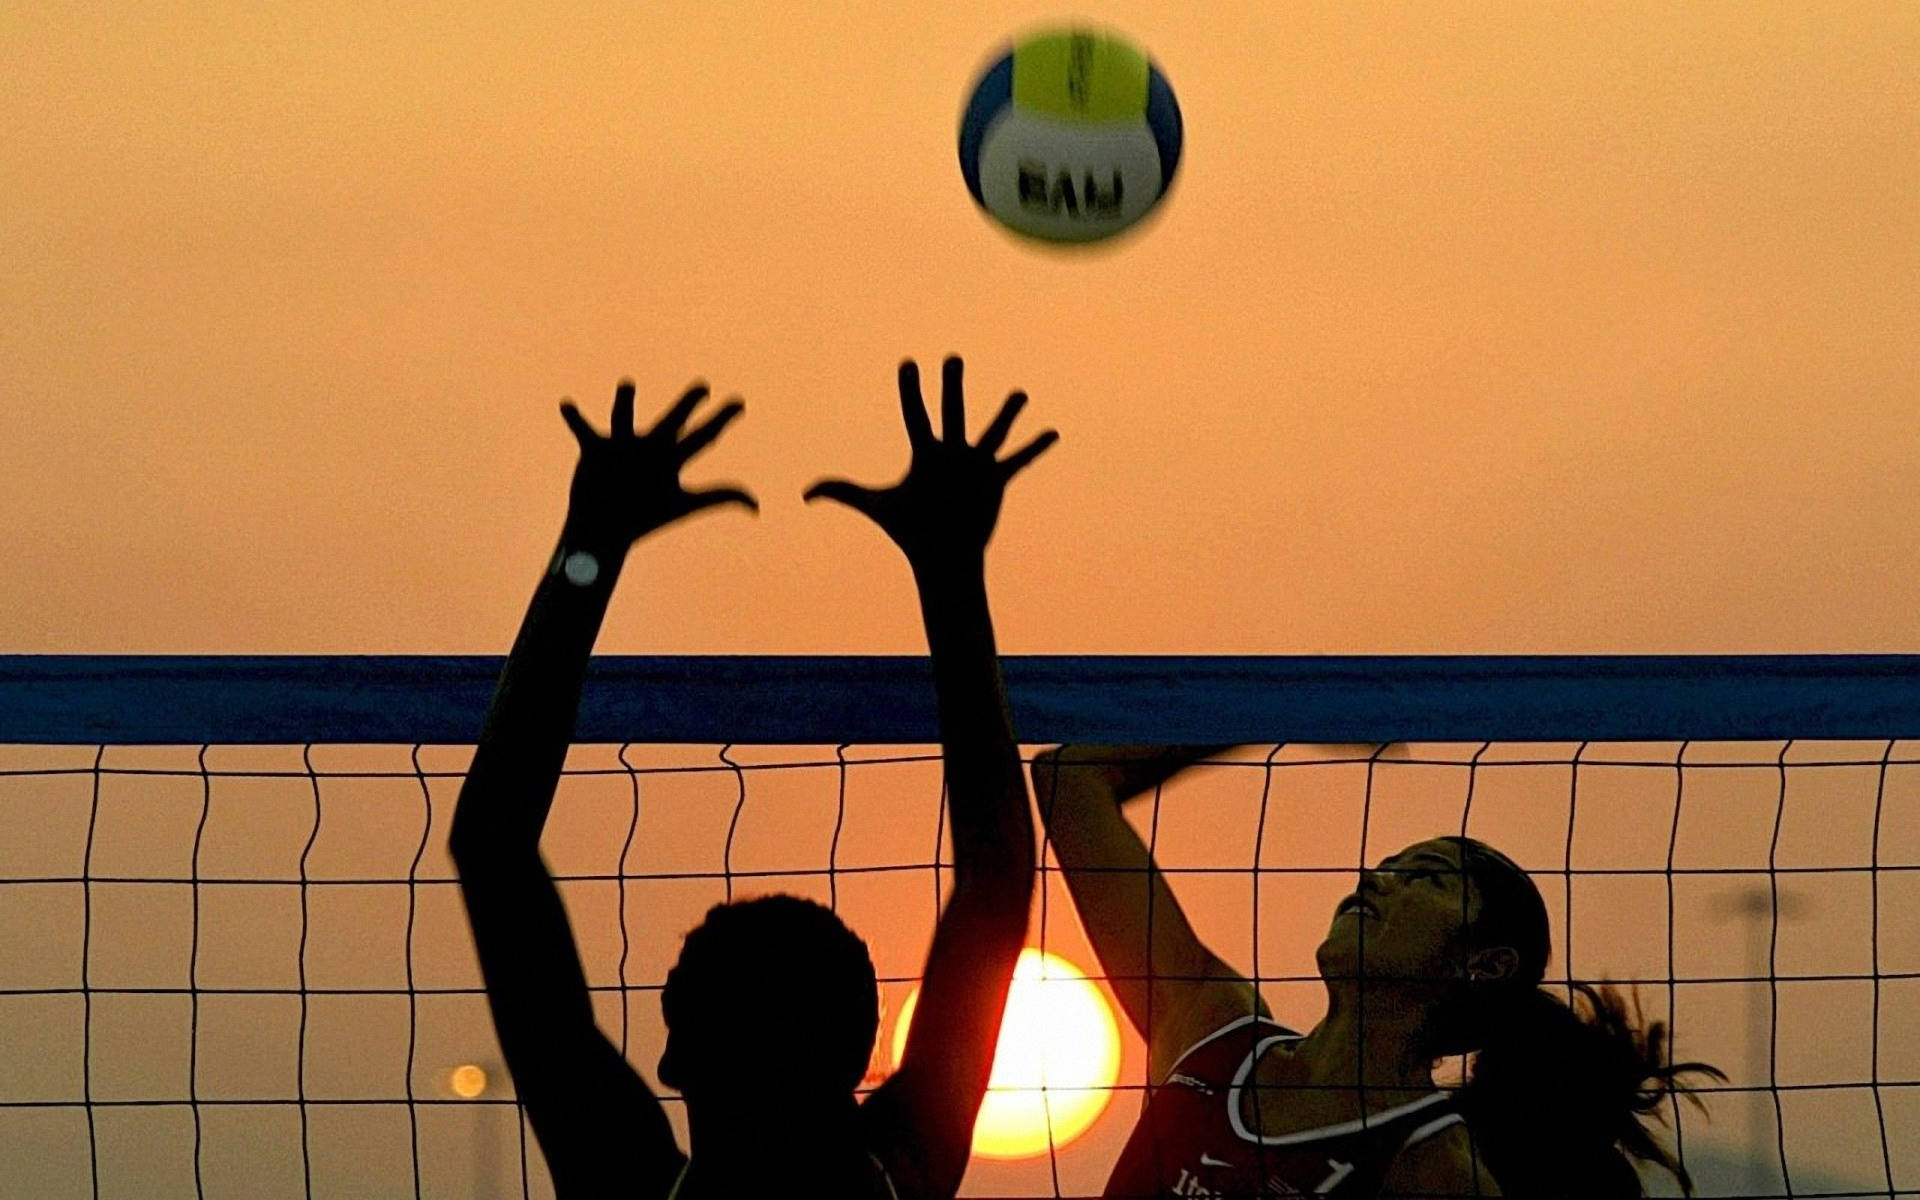 A couple of people playing volleyball at sunset - Volleyball